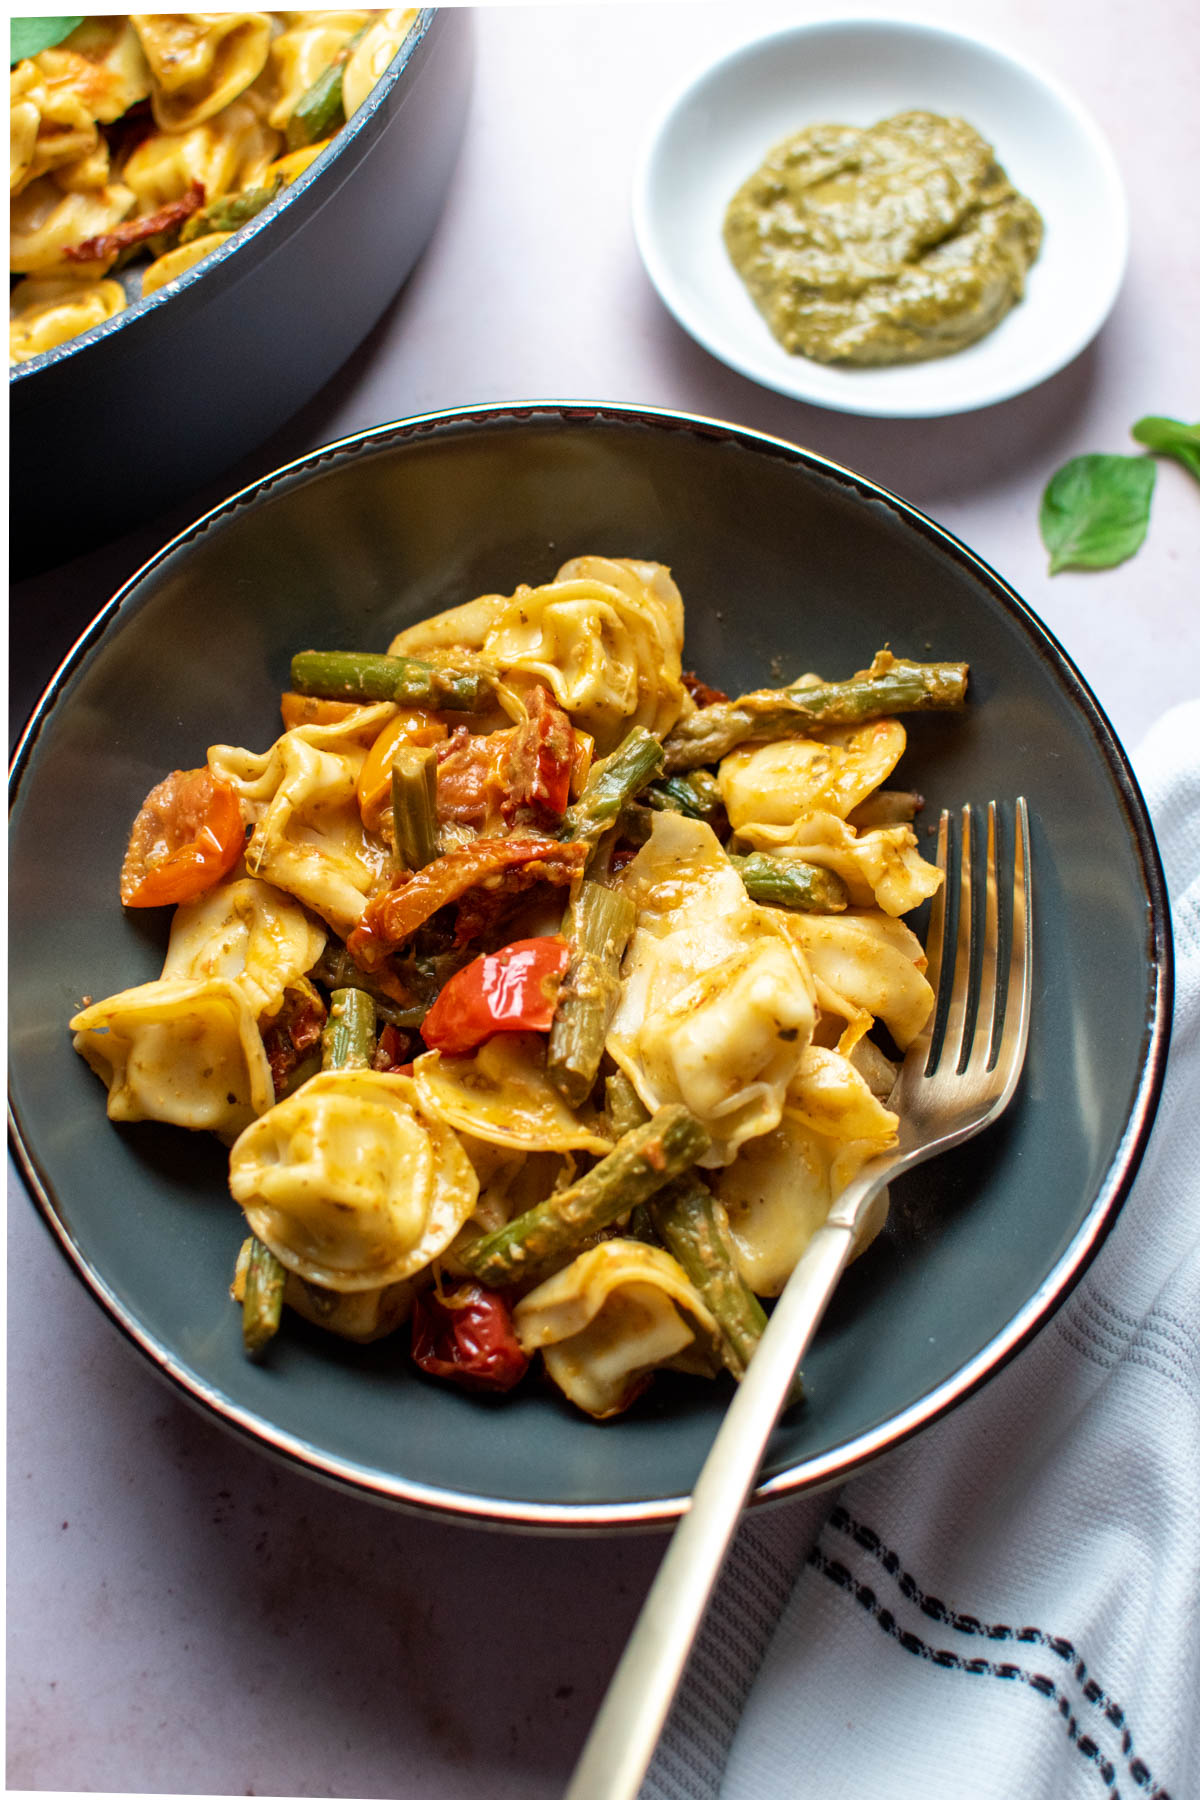 Pesto with tortellini and vegetables in blue gray bowl with gold fork.